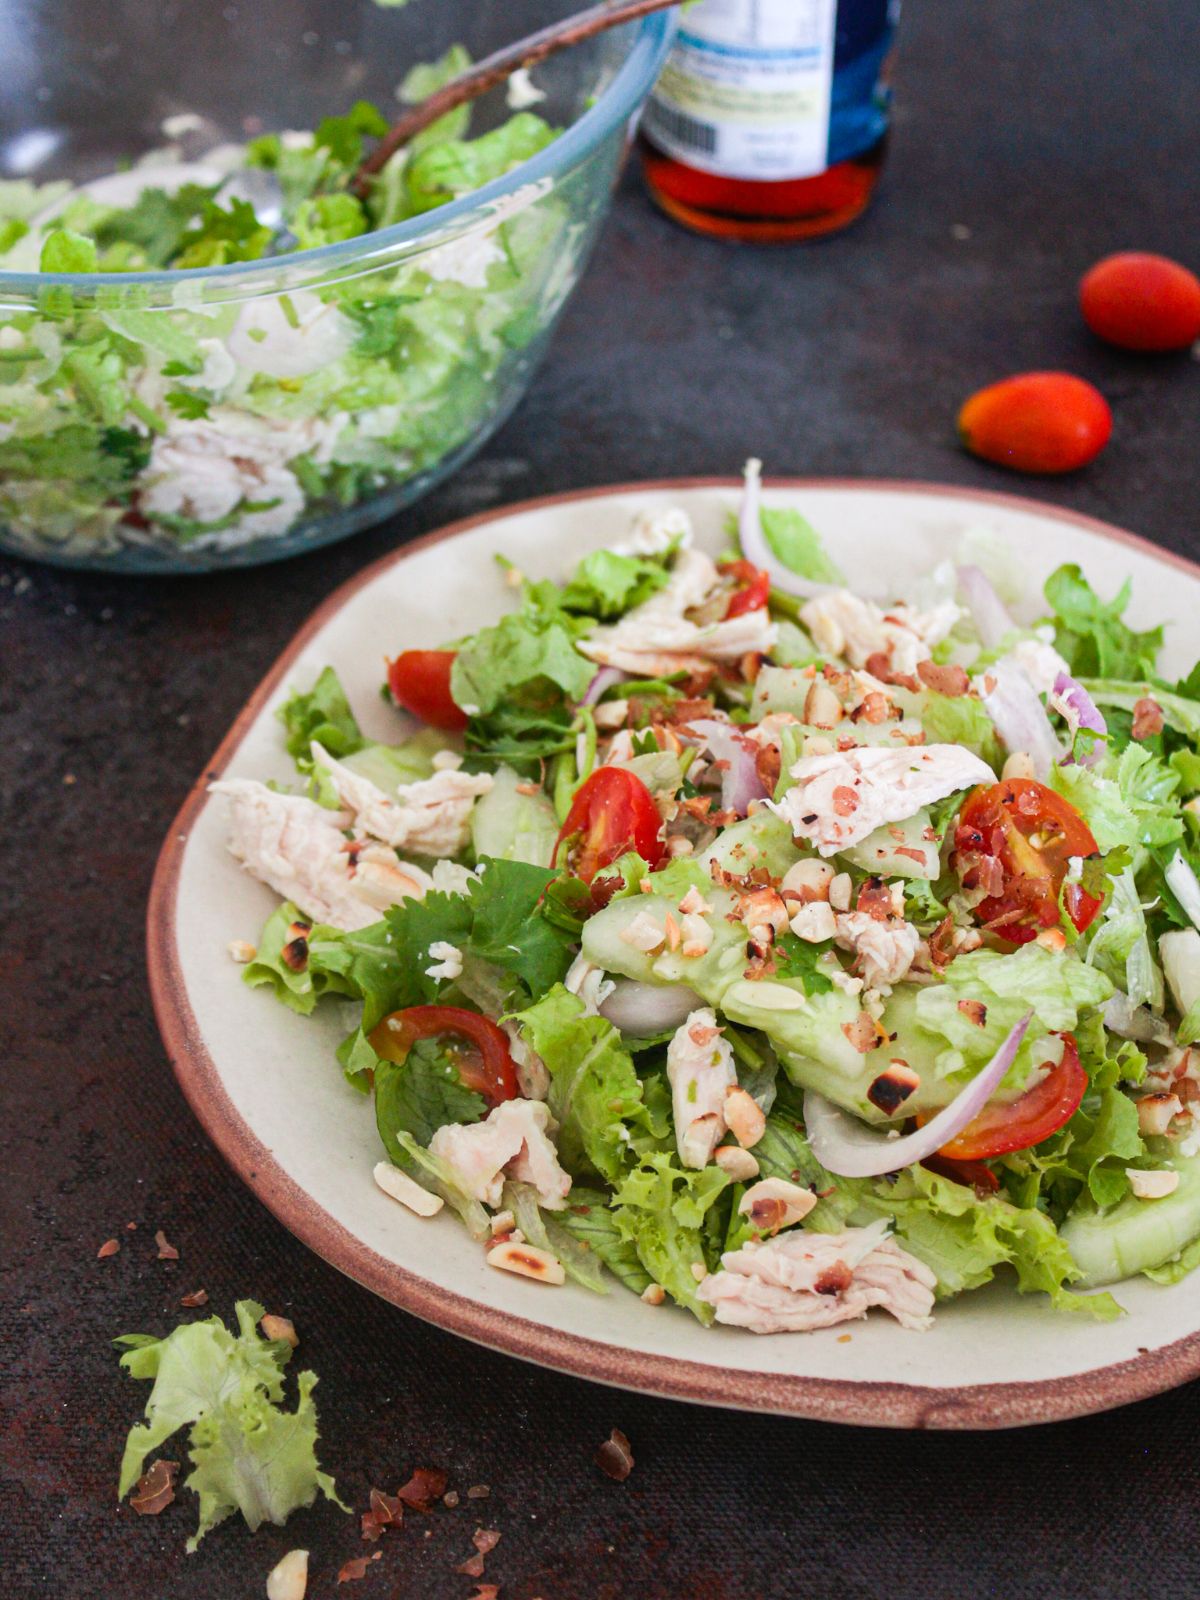 Plate of salad with chicken and tomatoes